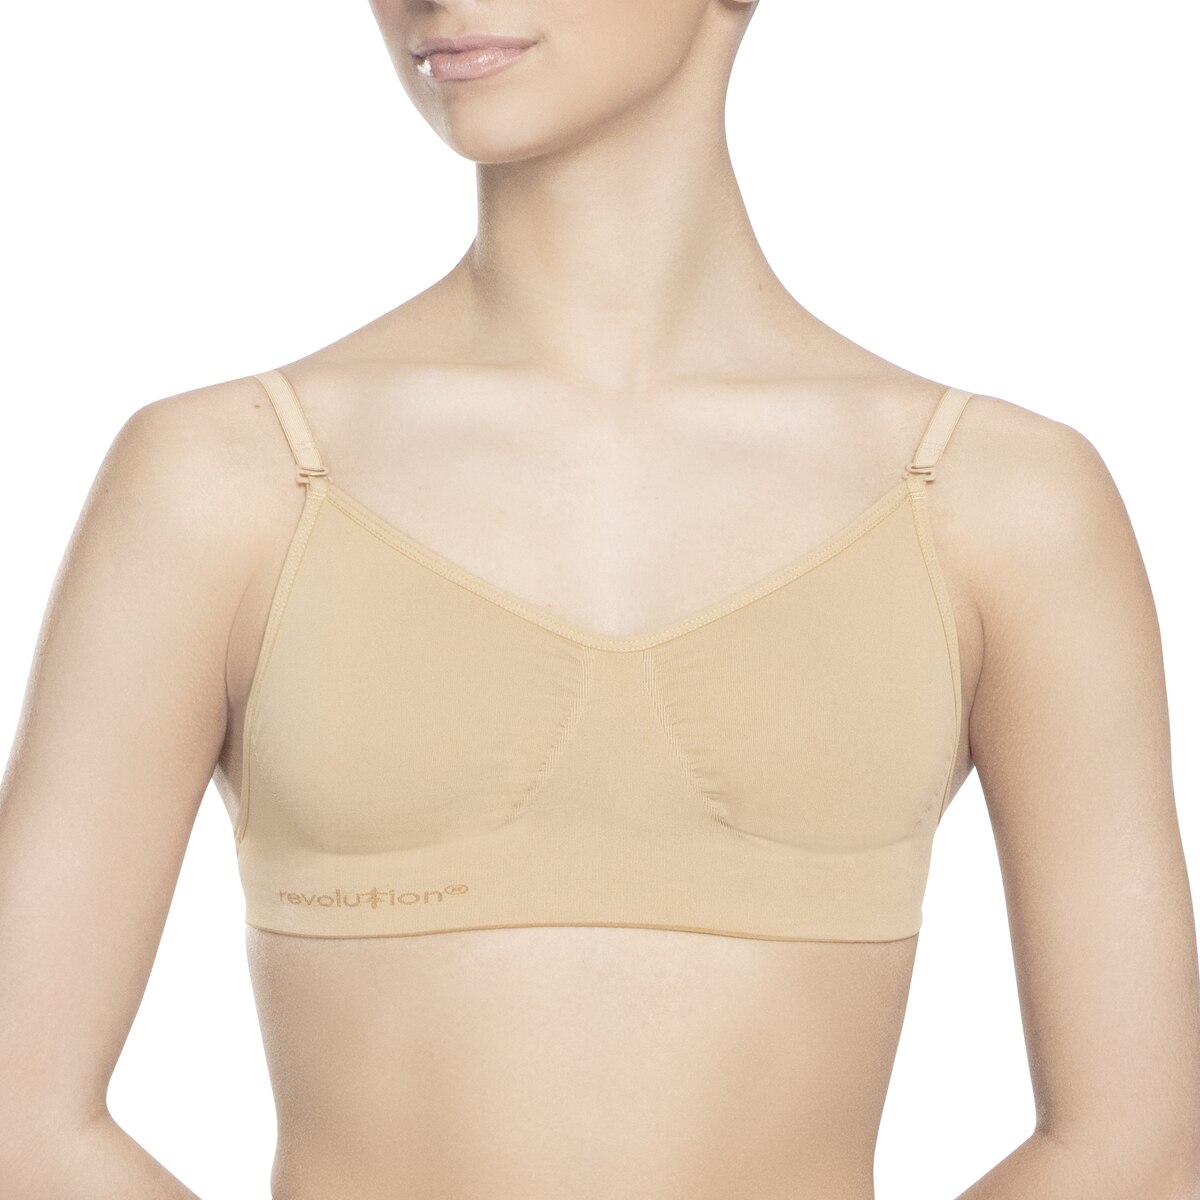 Buy online high quality Pre-Order Revolution Convertible Strap Bra - The Village - The Movement Boutique - Kelowna